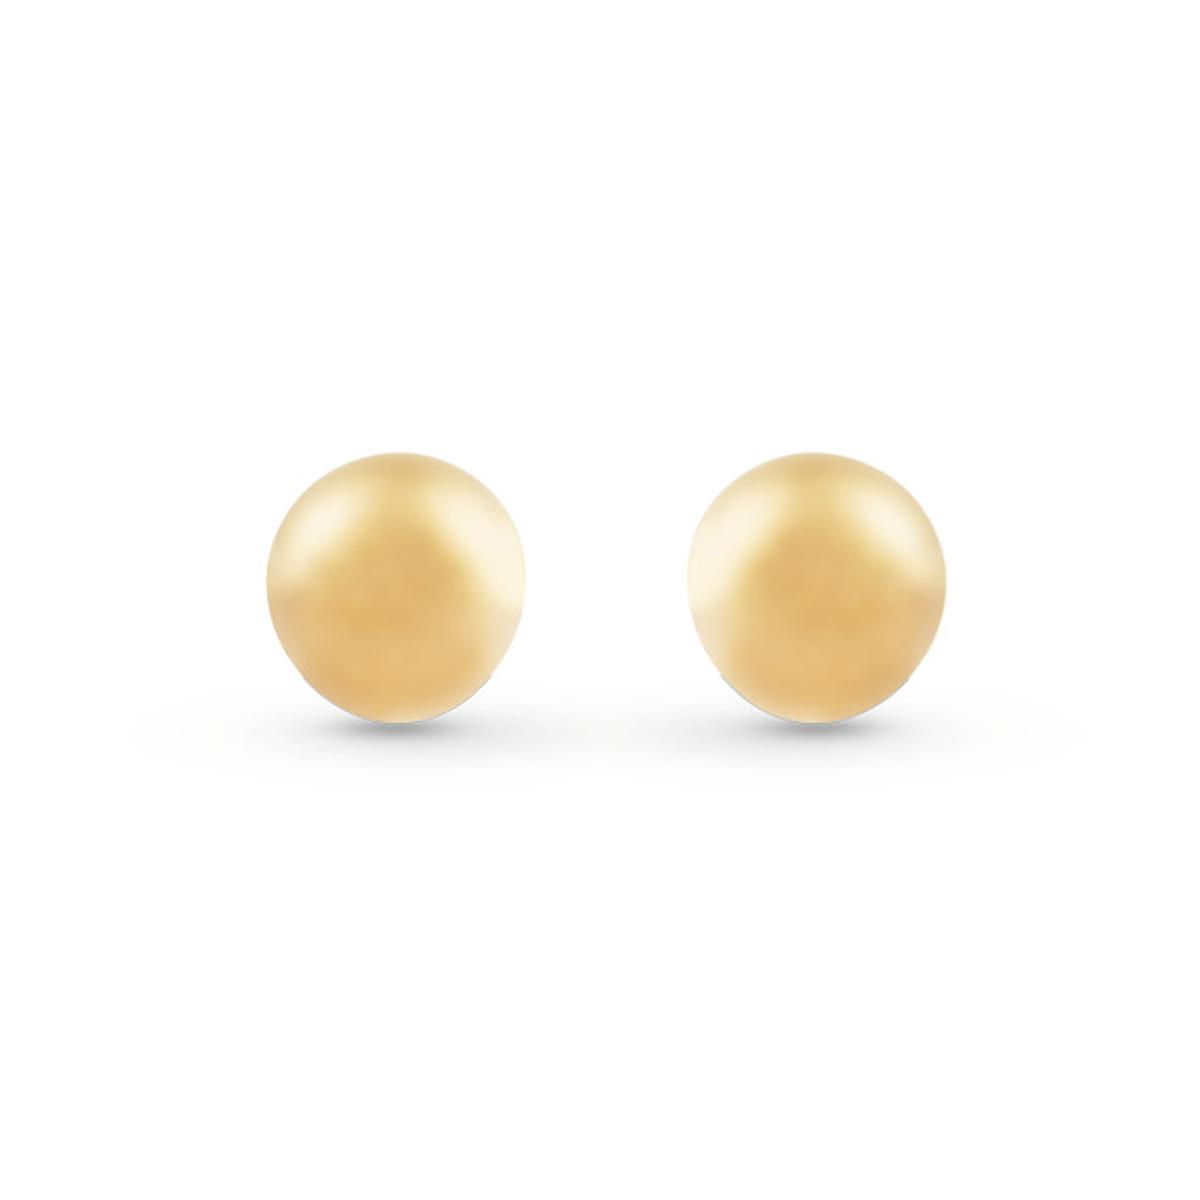 Round earrings in 18kt polished yellow gold - OP0026